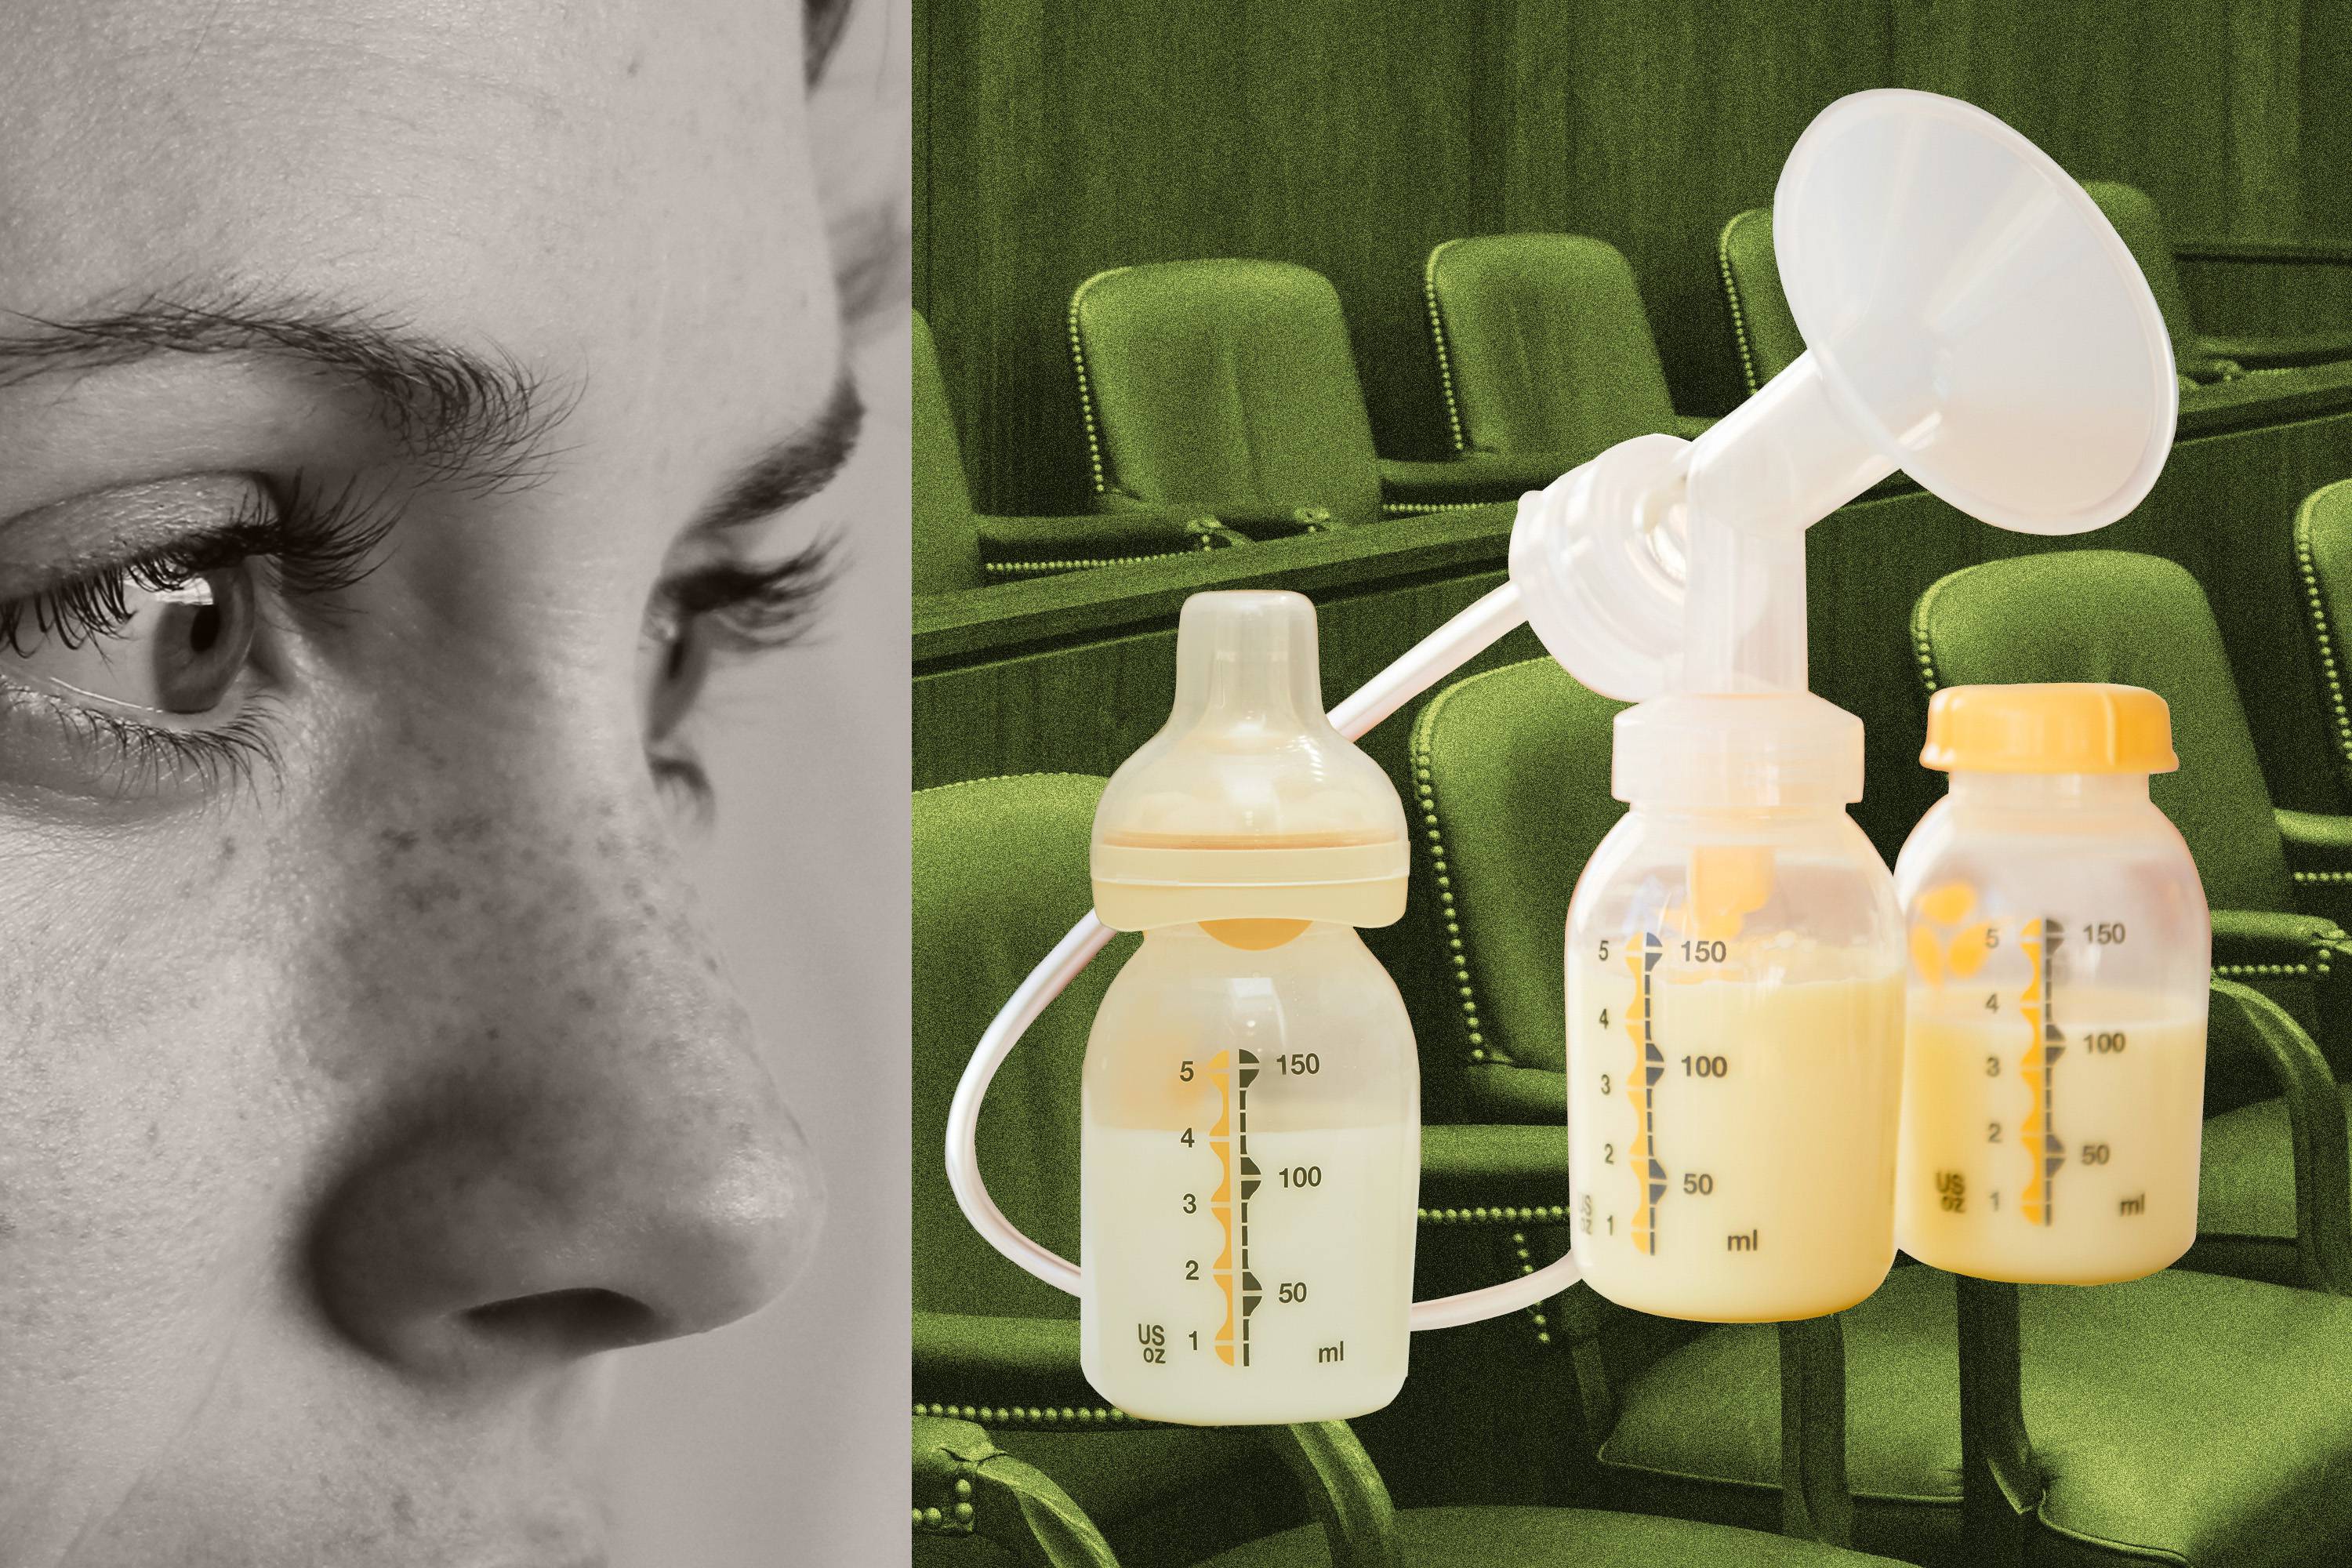 Photo collage shows close up of woman’s face in profile, her eyes look right. On right side of collage are a breast pump and baby bottle with a jury box seats in the background.